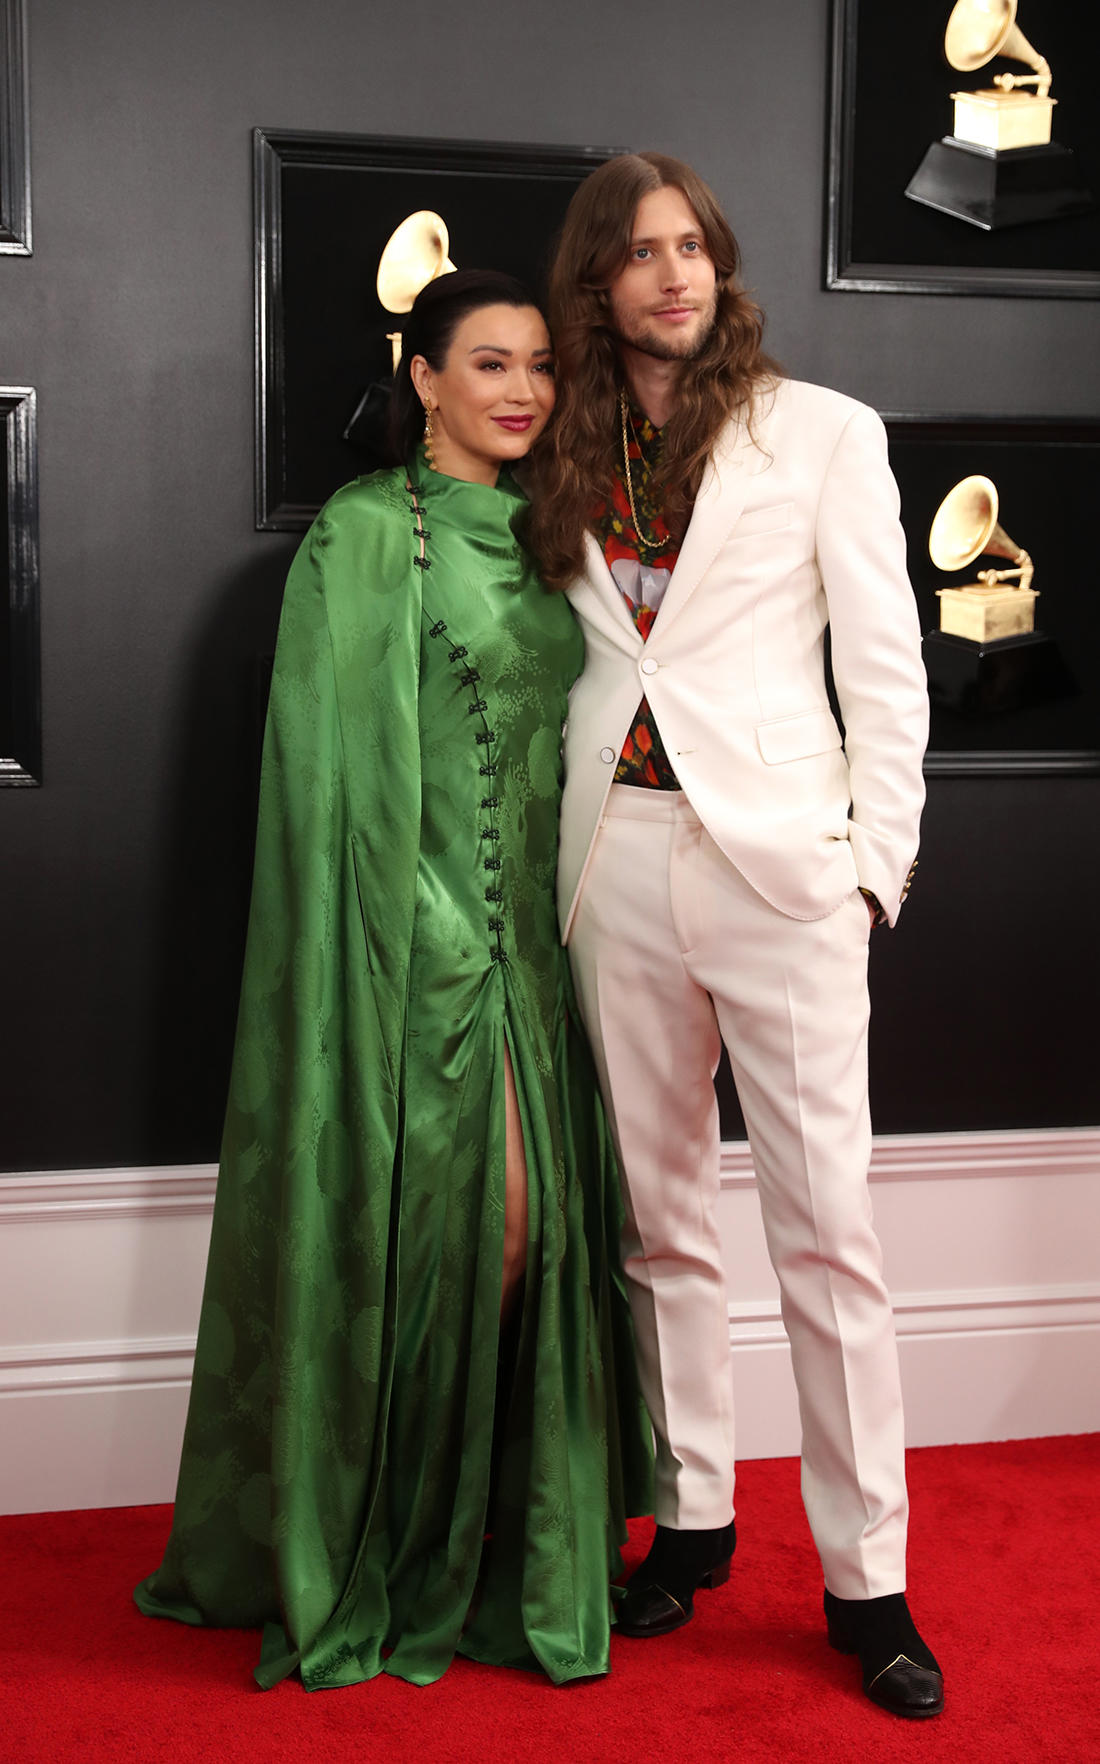 Red Carpet pictures from the Grammy Awards 2019